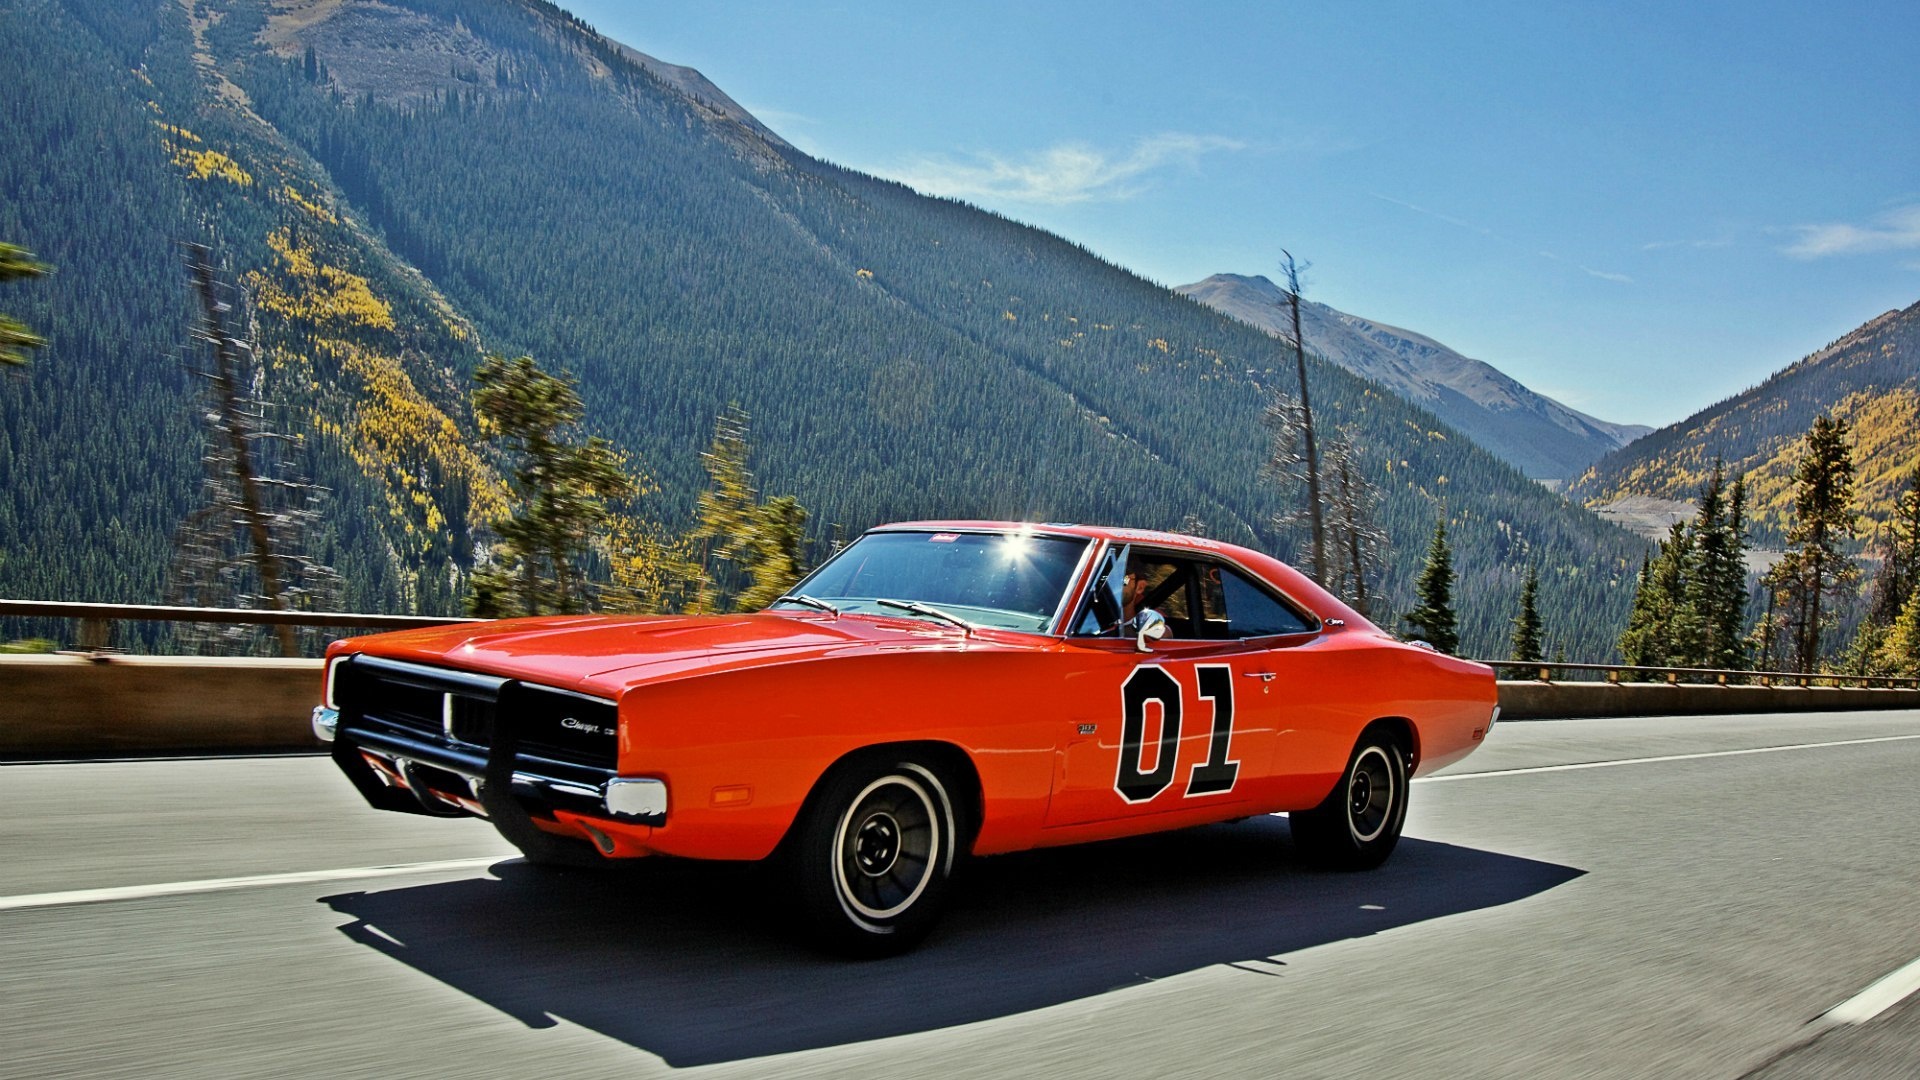 Wallpaper General Lee Dodge Charger The Dukes Of Hazzard